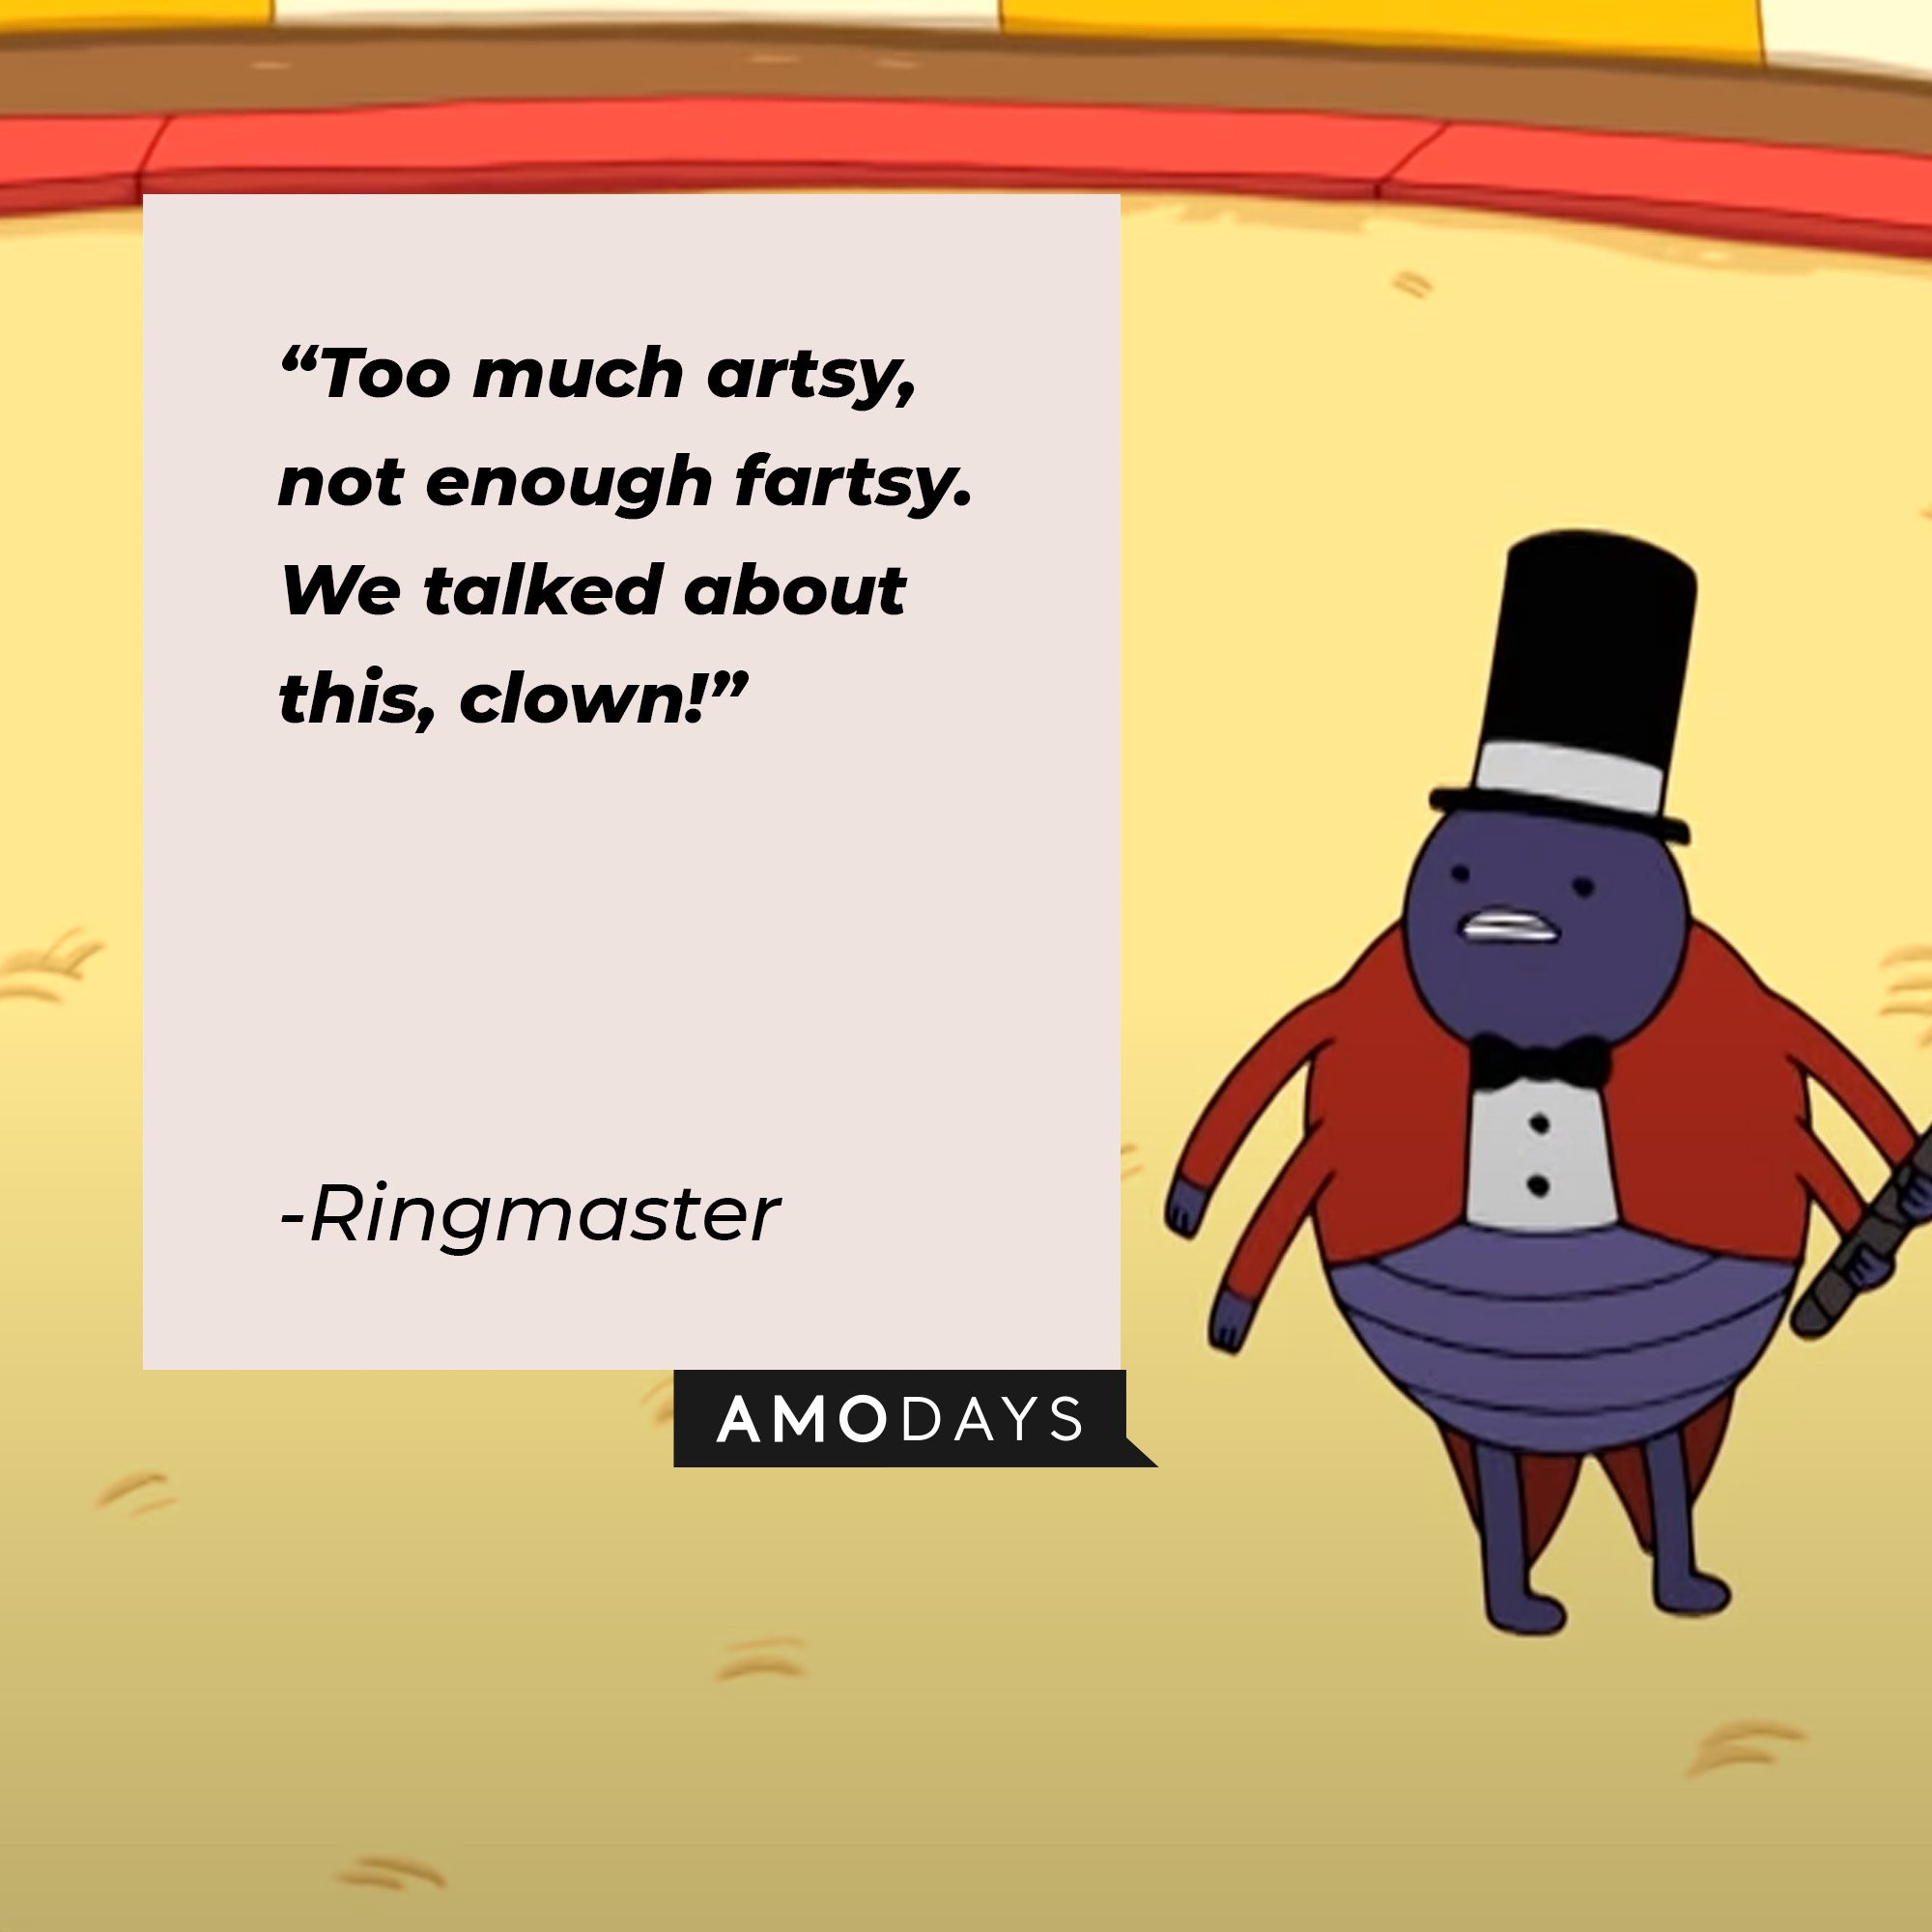 Ringmaster’s quote: “Too much artsy, not enough fartsy. We talked about this, clown!”  | Image: AmoDays